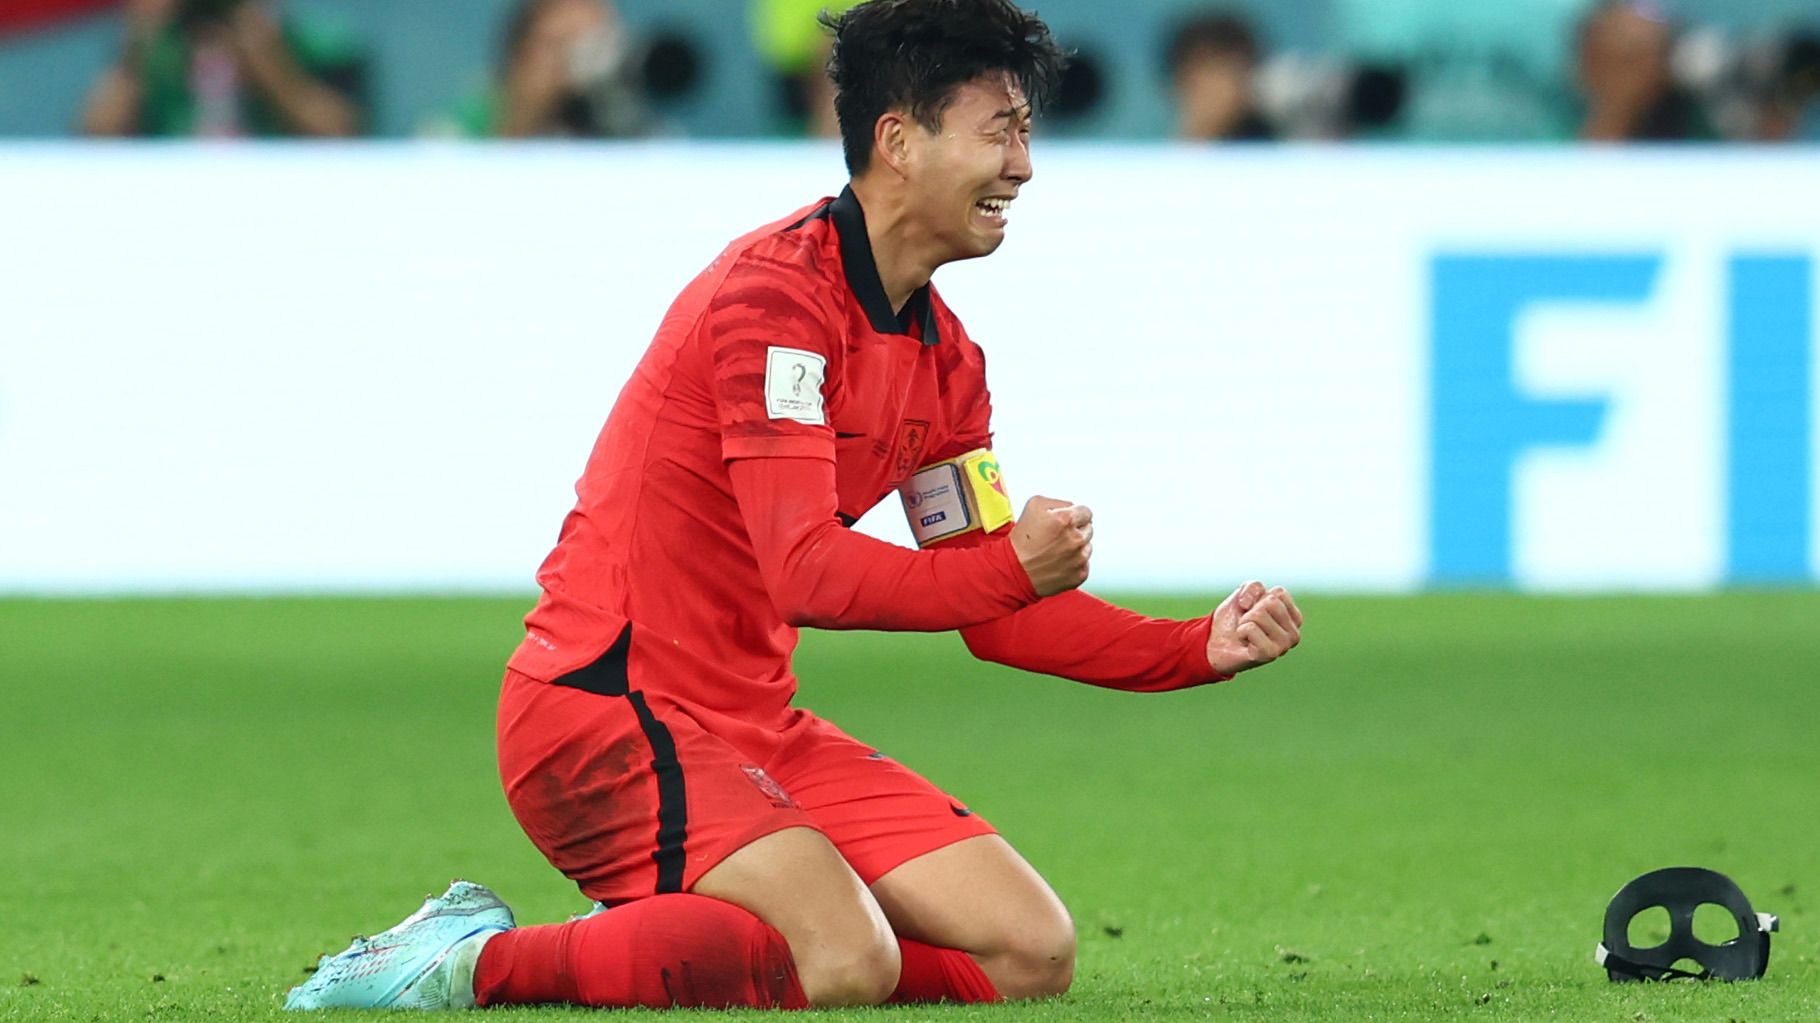 Heung-min Son of Korea Republic reacts at the end of the FIFA World Cup Qatar 2022 Group H match between Korea Republic and Portugal at Education City Stadium on December 2, 2022 in Al Rayyan, Qatar. (Photo by Chris Brunskill/Fantasista/Getty Images)